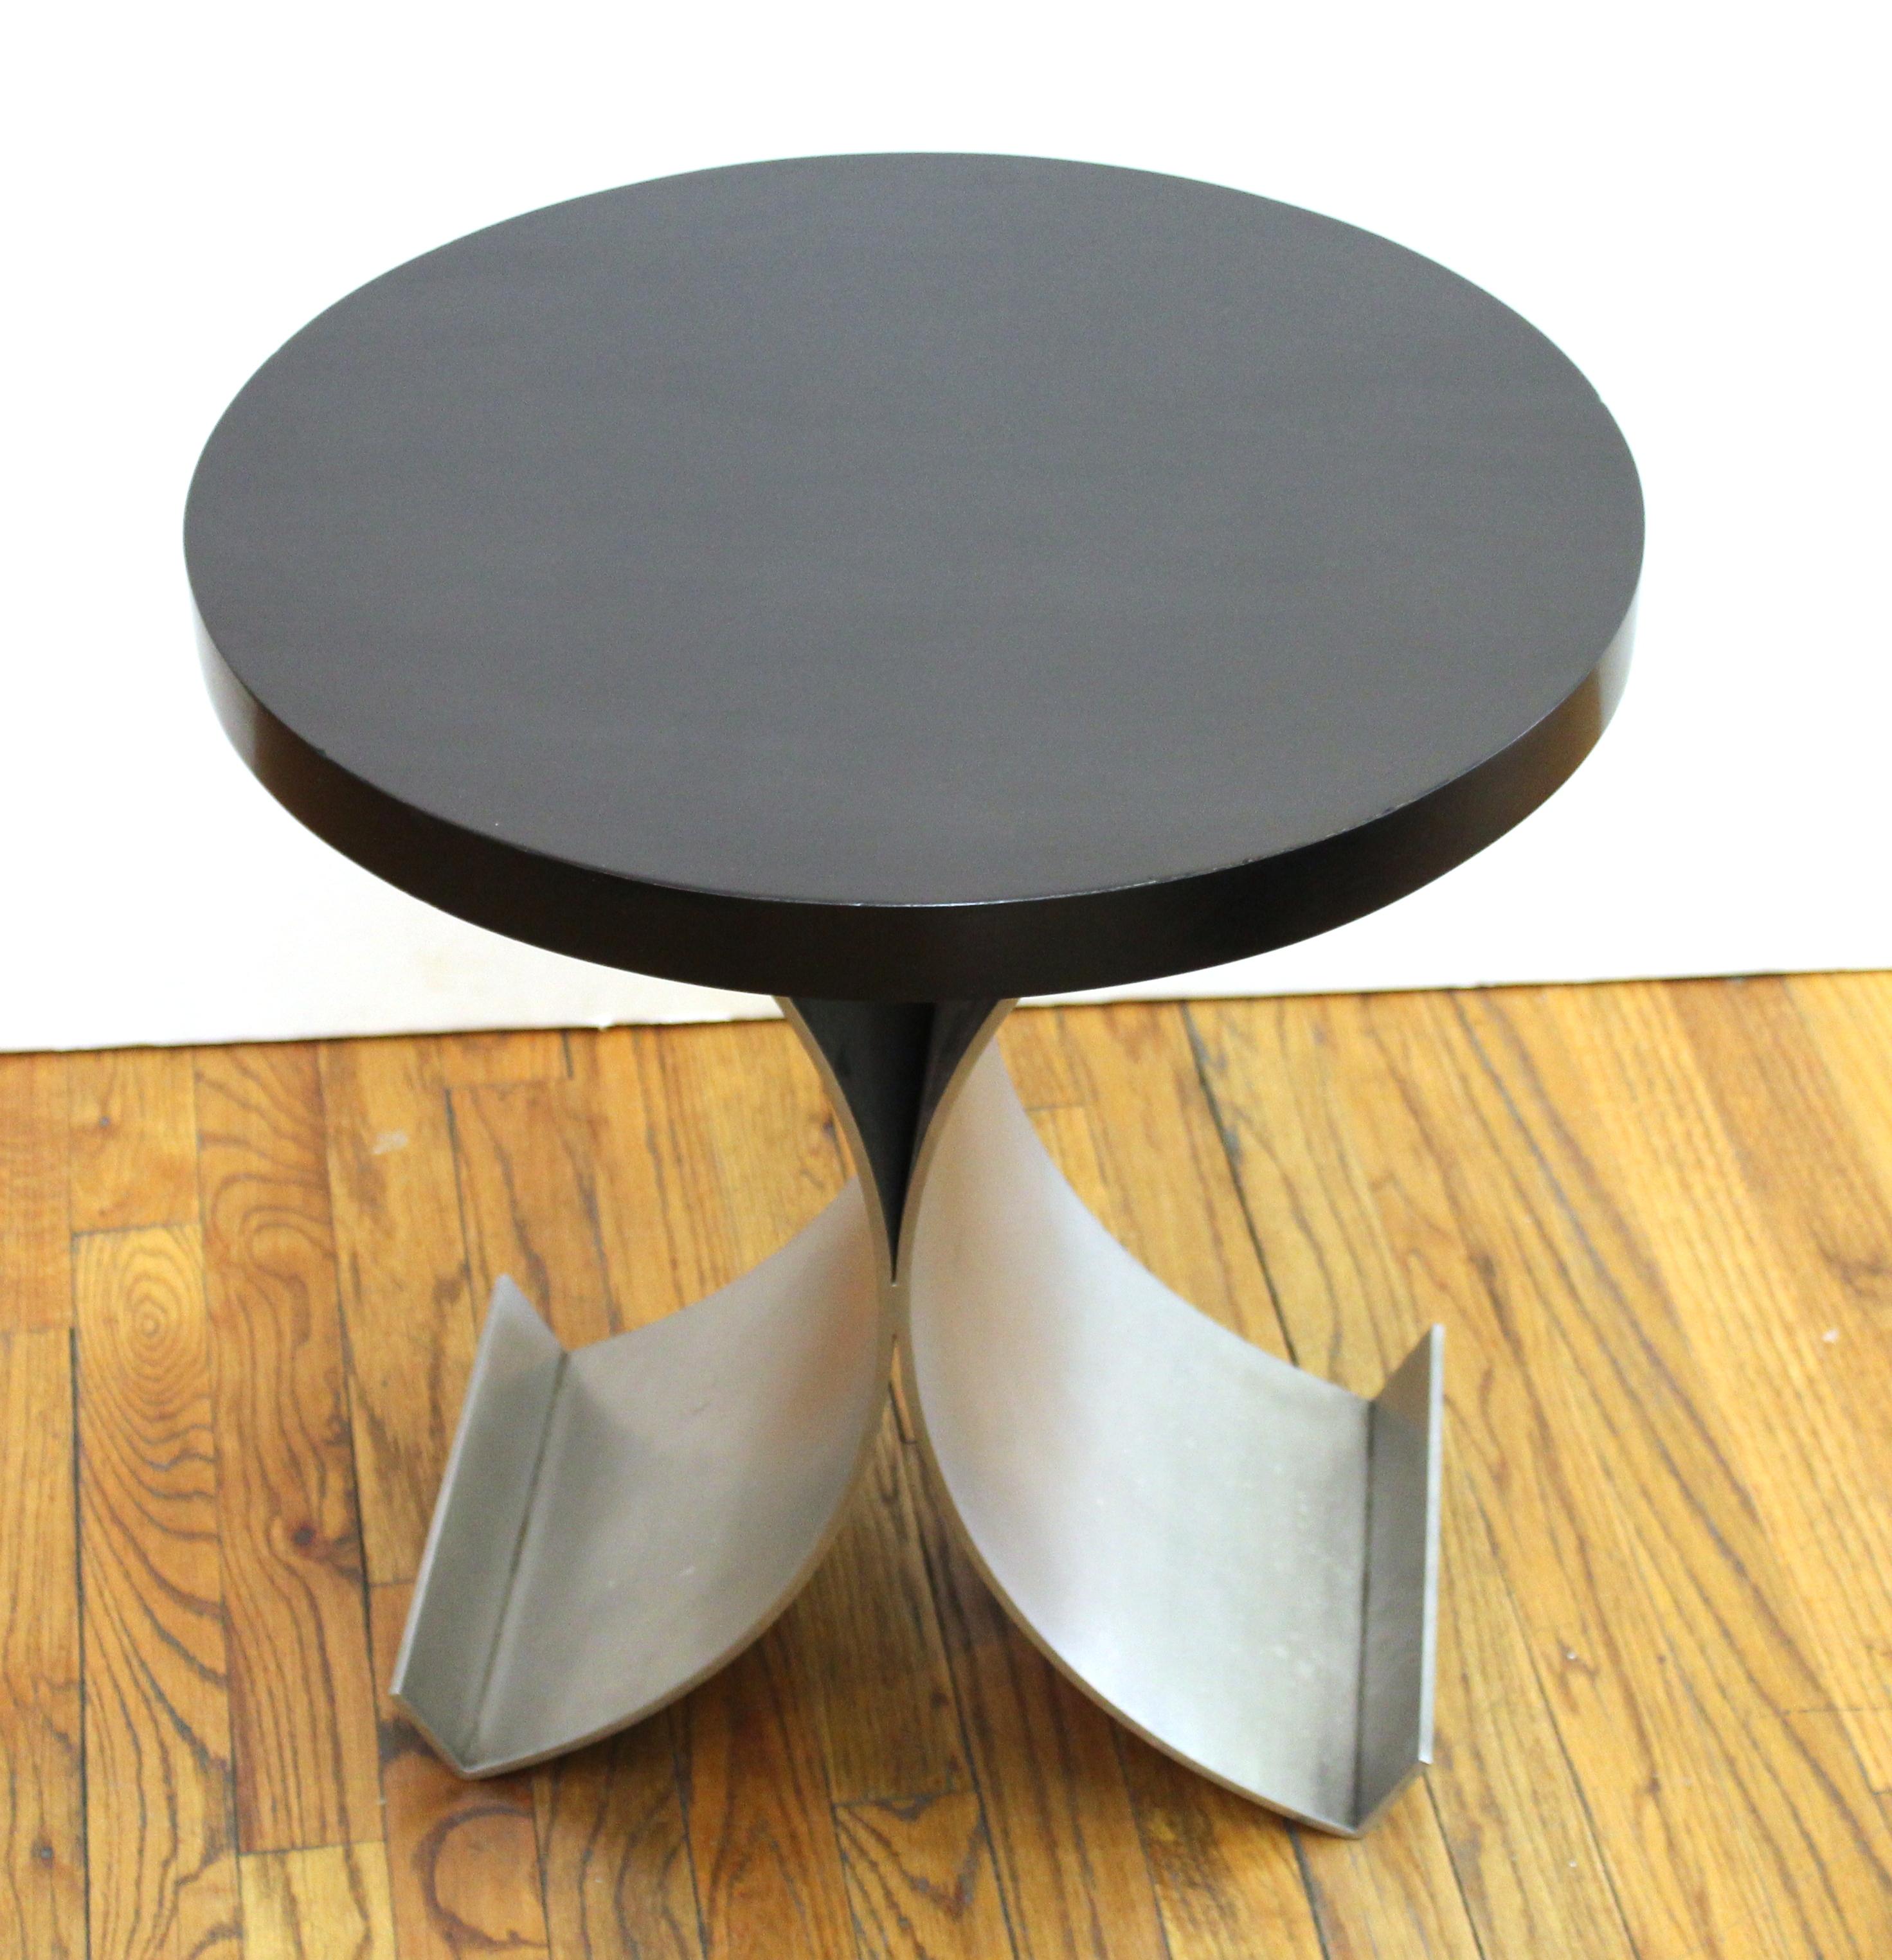 Henry Royer modern side table with round wood top and arched metal base, handcrafted and marked 'Henry Royer' on the bottom.